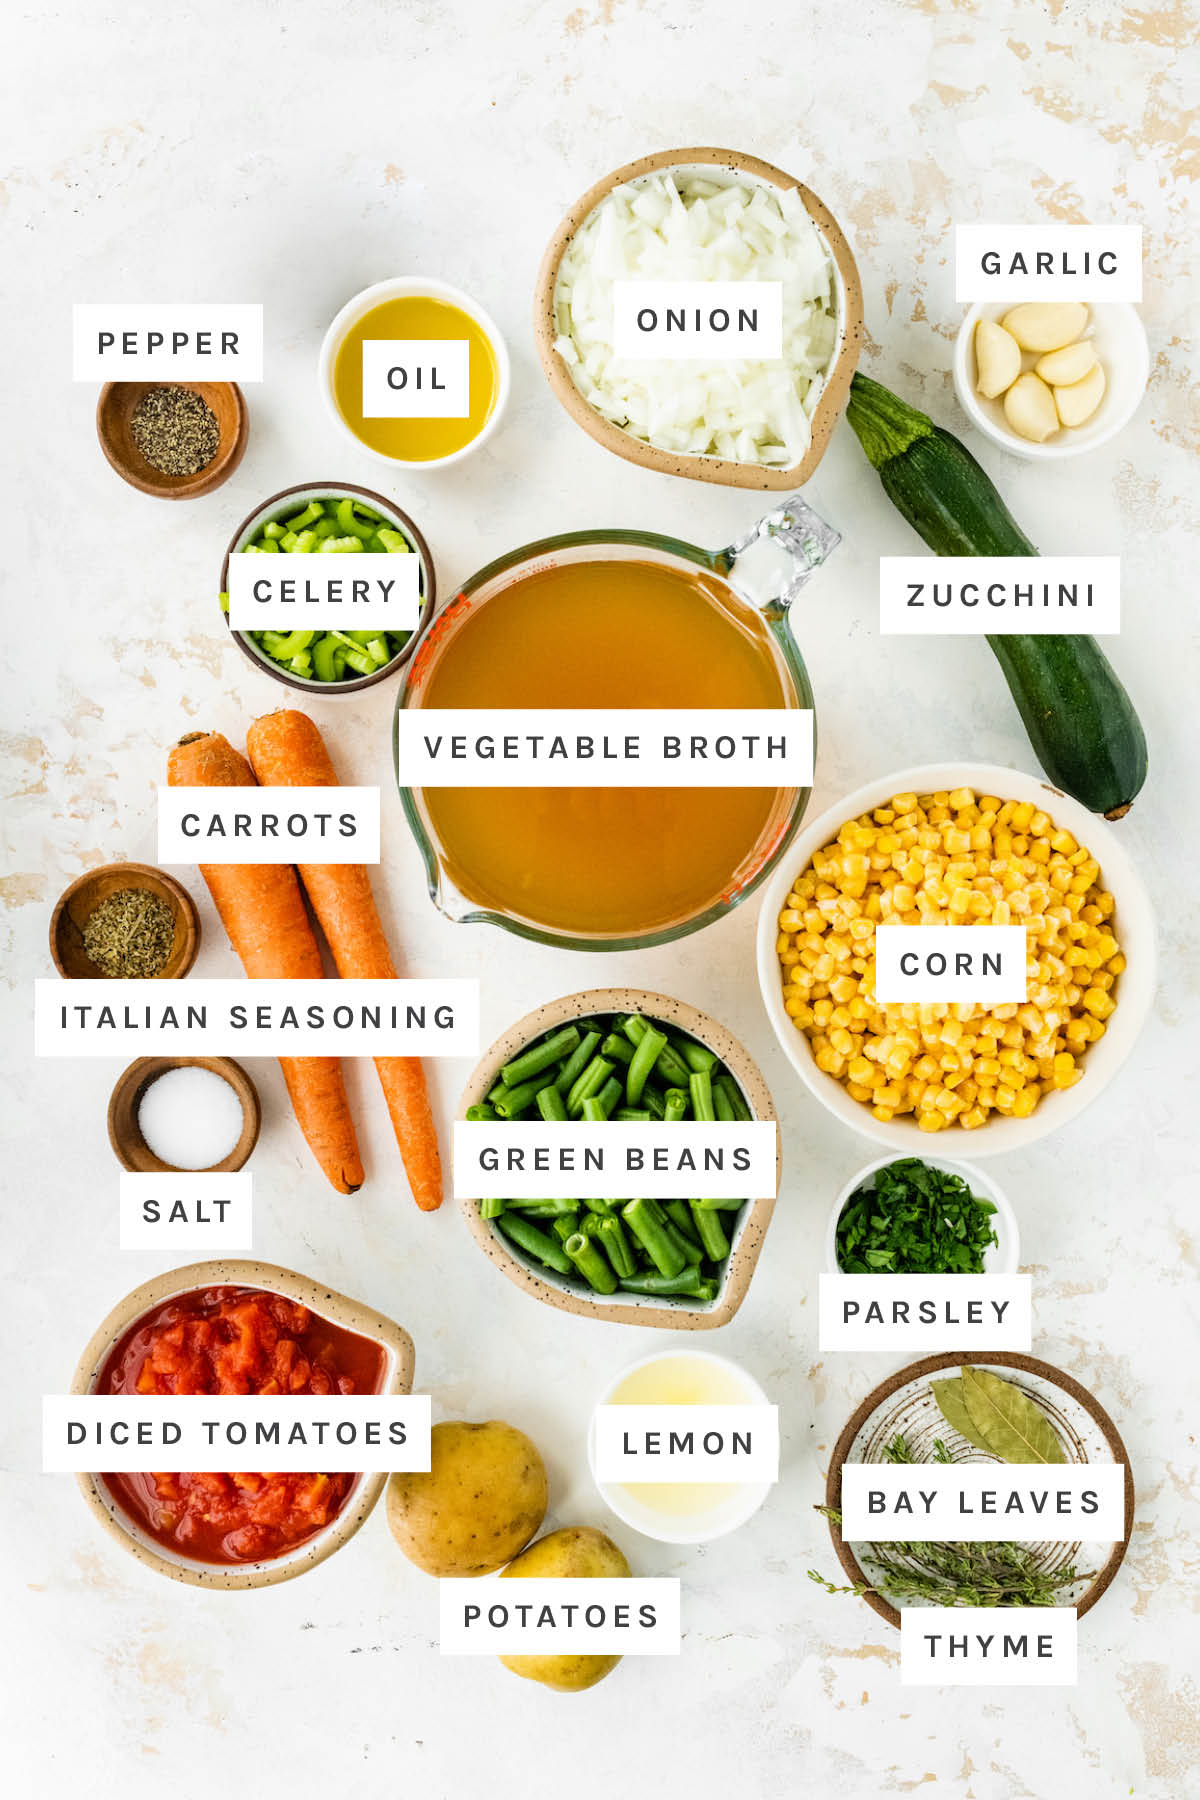 Ingredients measured out to make vegetable soup: pepper, oil, onion, garlic, celery, vegetable broth, zucchini, carrots, Italian seasoning, corn, salt, green beans, parsley, diced tomatoes, potatoes, lemon, bay leaves and thyme.